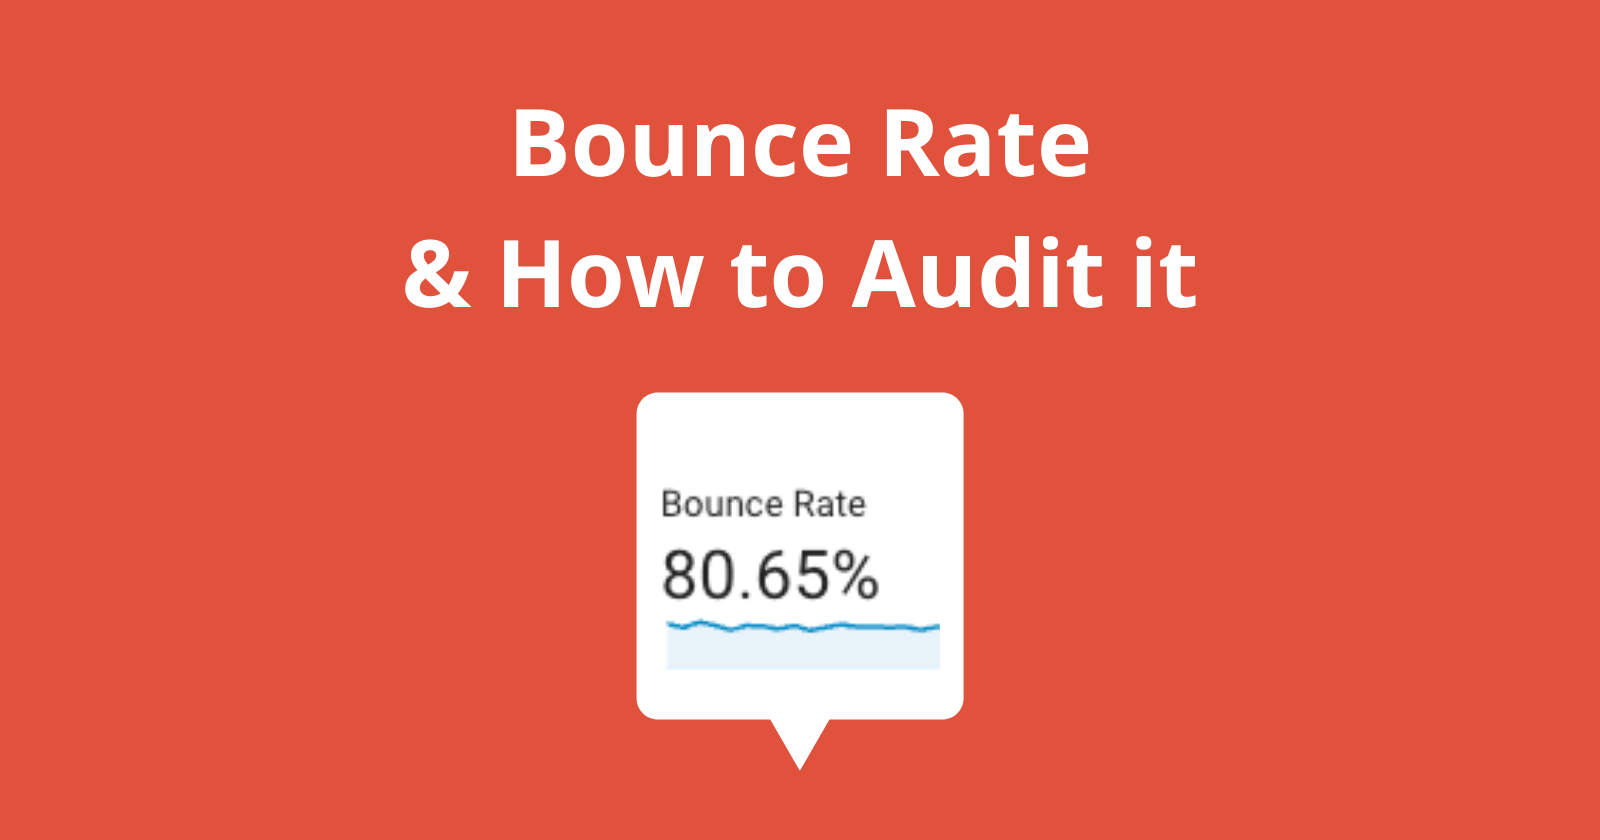 bounce-rate-and-how-to-audit-it_search-engine-journal_kayle-larkin-618a1821ef002-sej.png